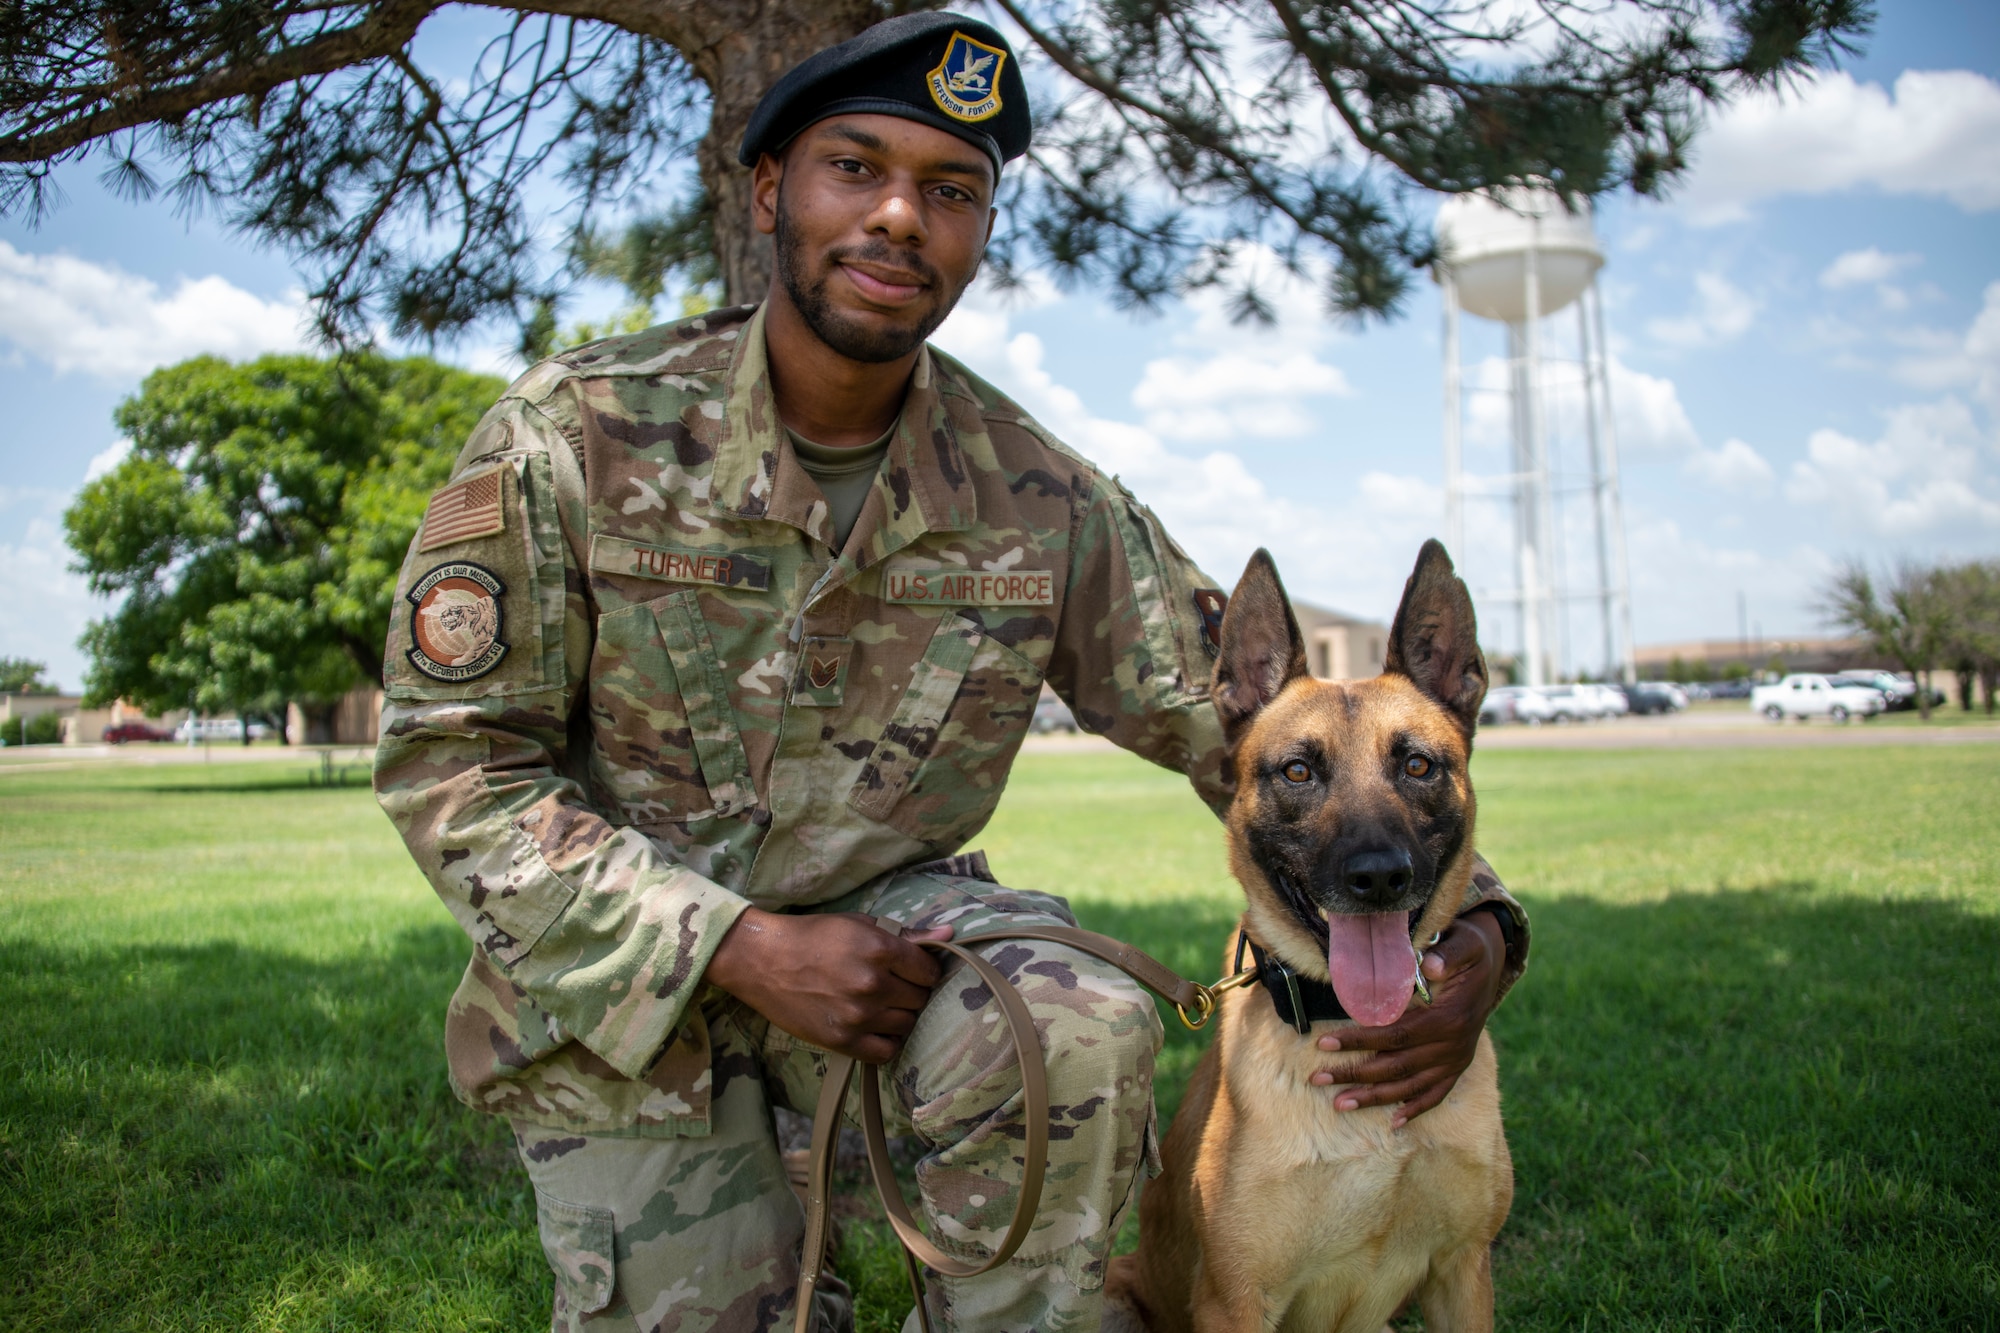 U.S. Air Force Staff Sgt. DeAndre Turner, 97th Security Forces Squadron Military Working Dog (MWD) handler, kneels next to his MWD, “Bess,” at Altus Air Force Base, Oklahoma, July 28, 2021. MWD teams will switch handlers and dogs to build their individual competencies. (U.S. Air Force photo by Staff Sgt. Cody Dowell)